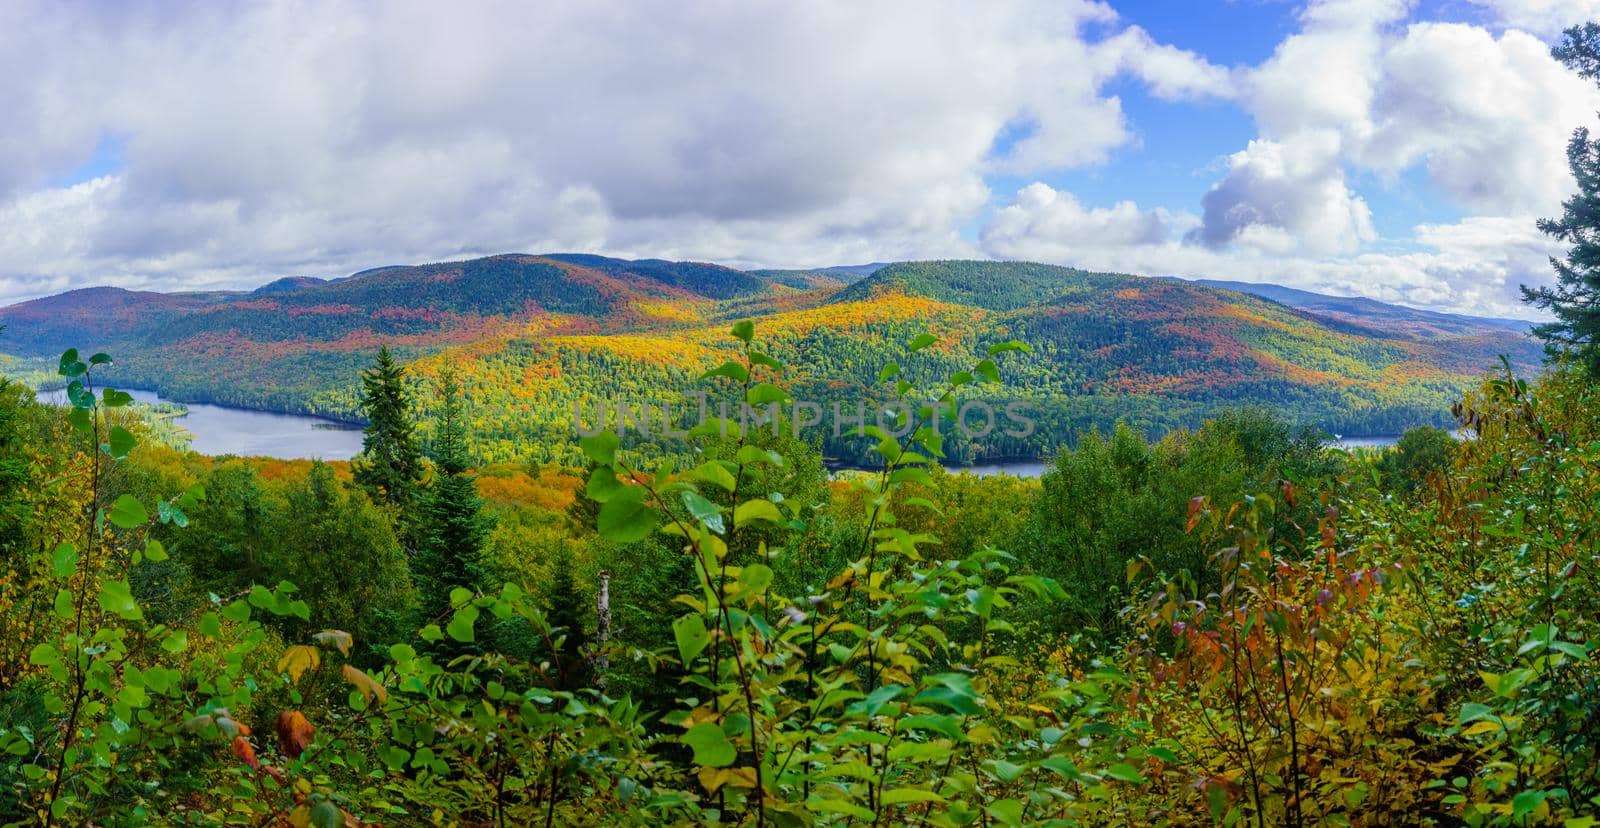 View of La Pimbina valley with fall foliage colors in Mont Tremblant National Park, Quebec, Canada